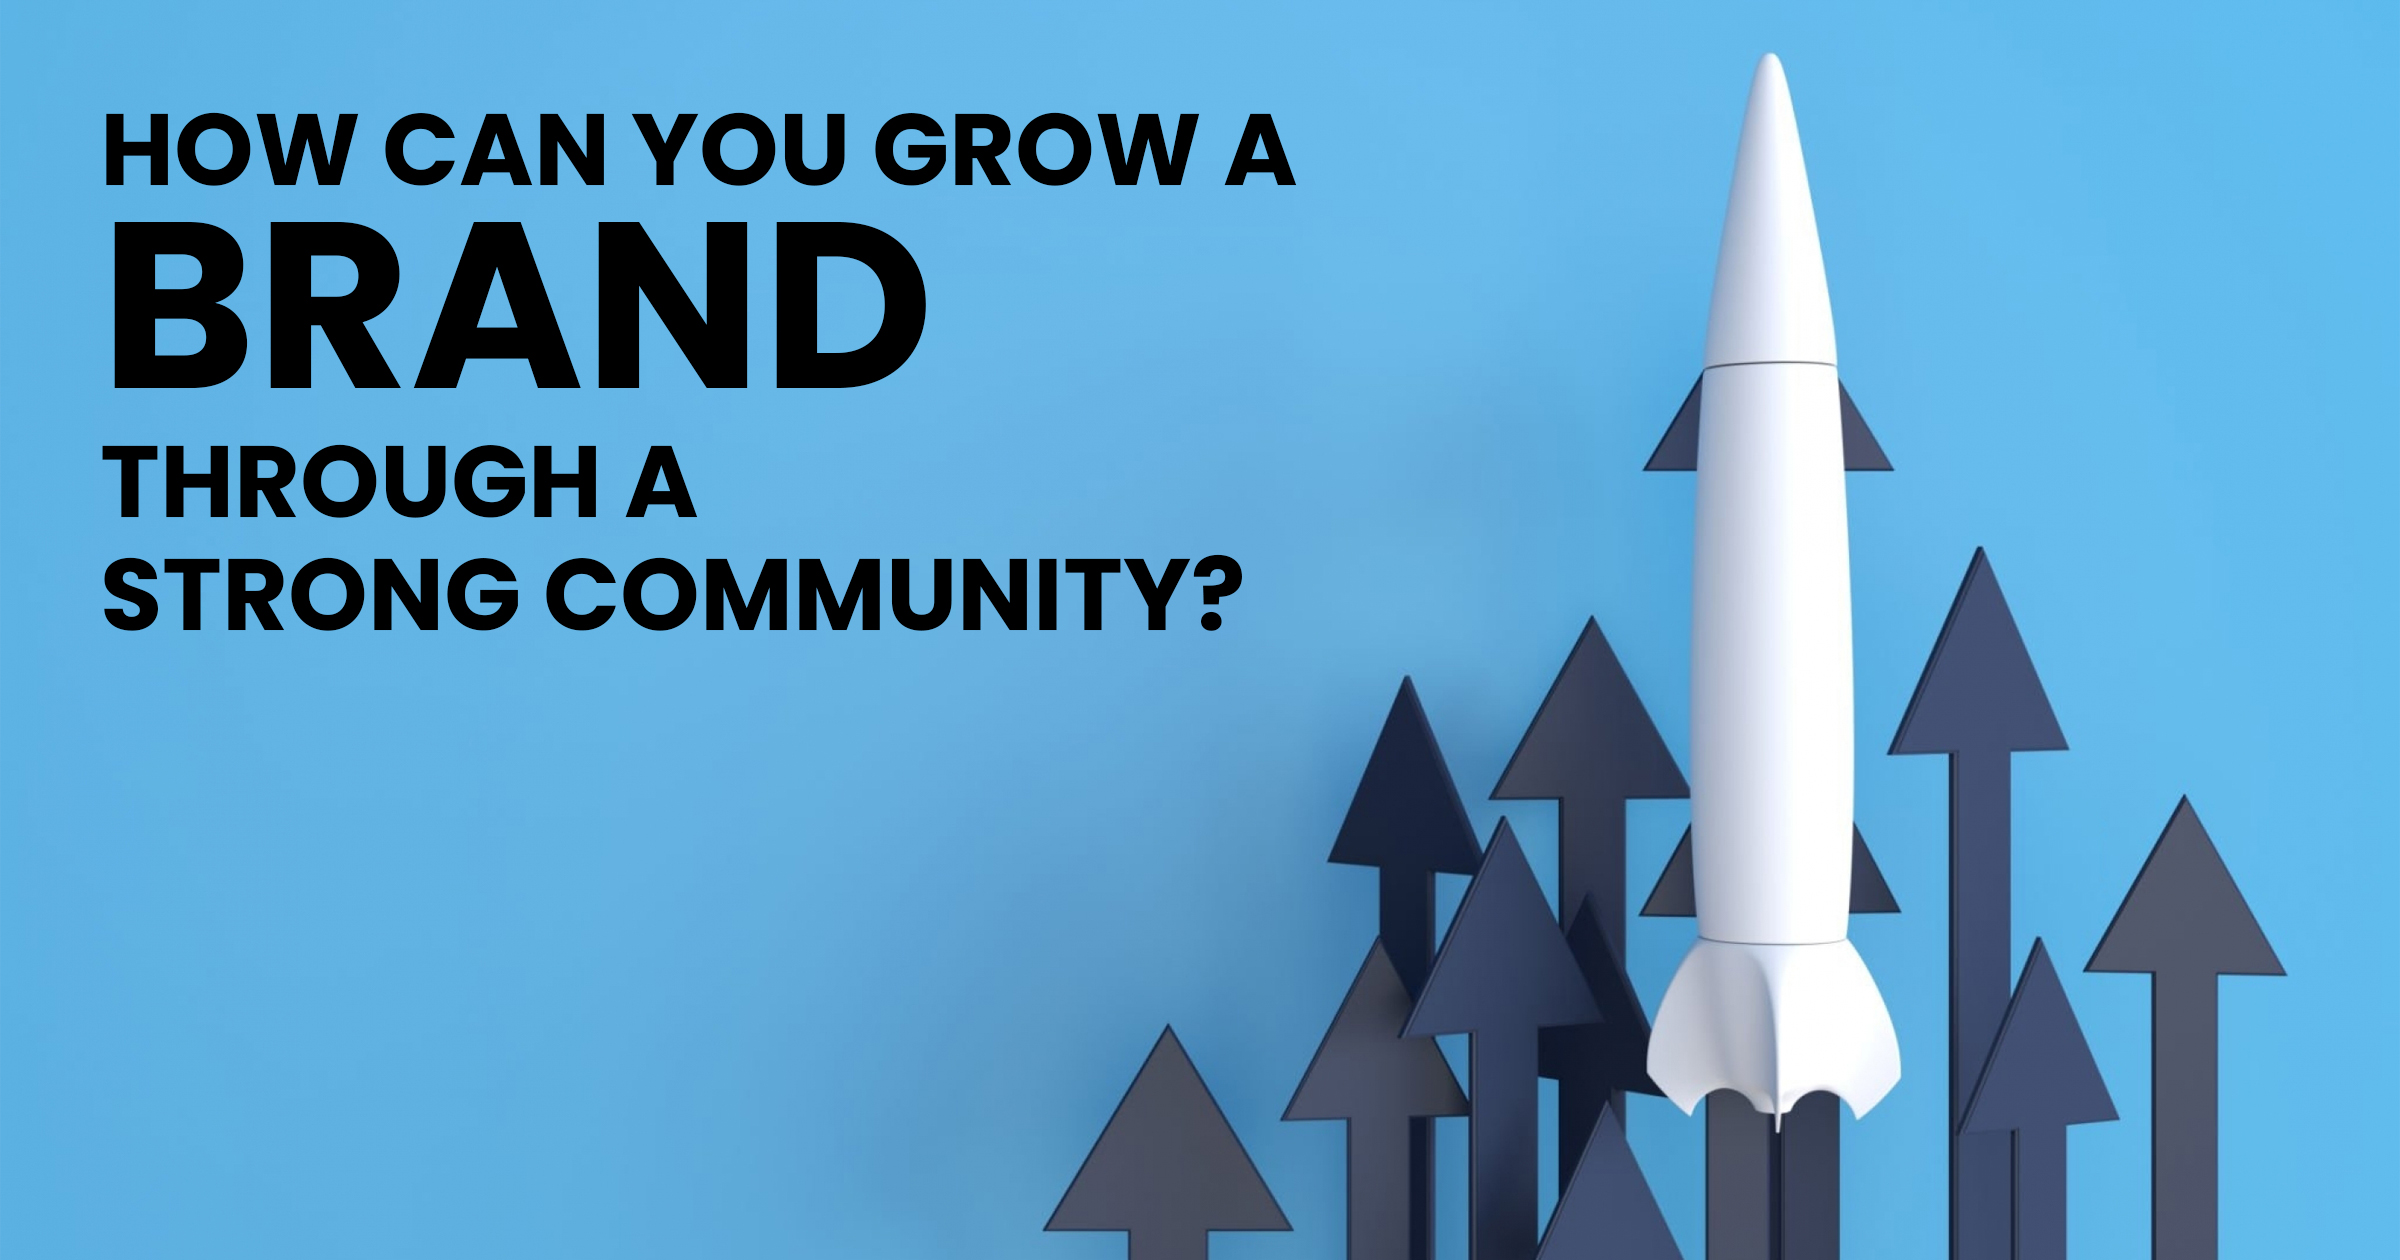 How can you grow a brand through a strong community?